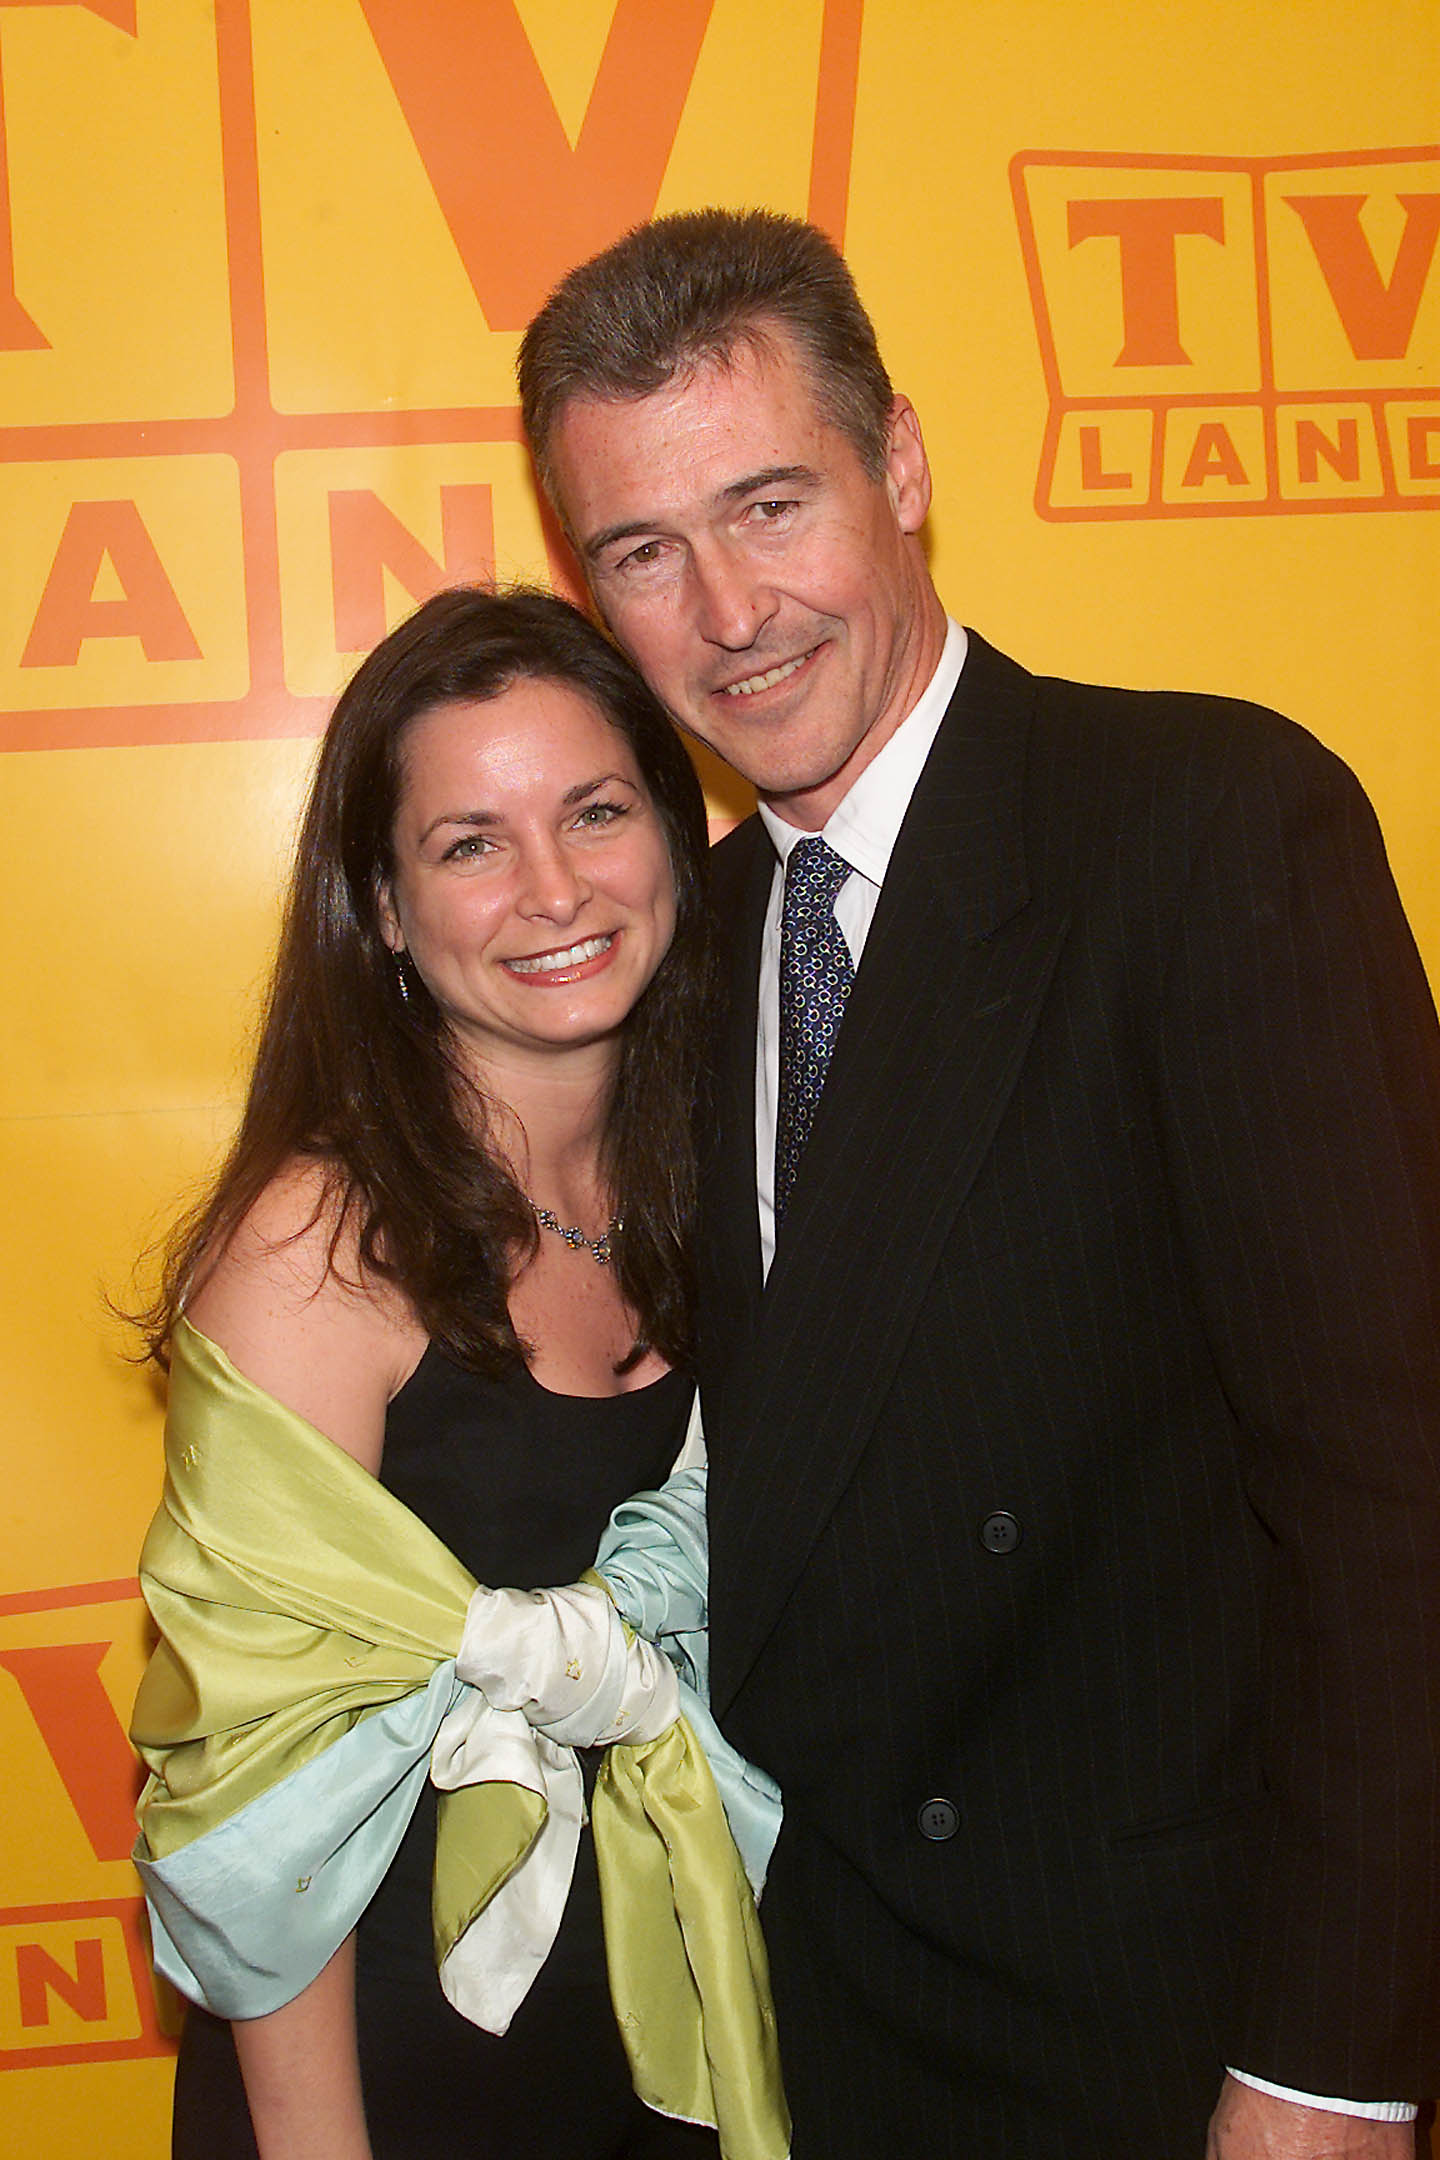 Randolph Mantooth and Kristen Conners at TV Land fifth anniversary celebration in 2001 | Source: Getty Images